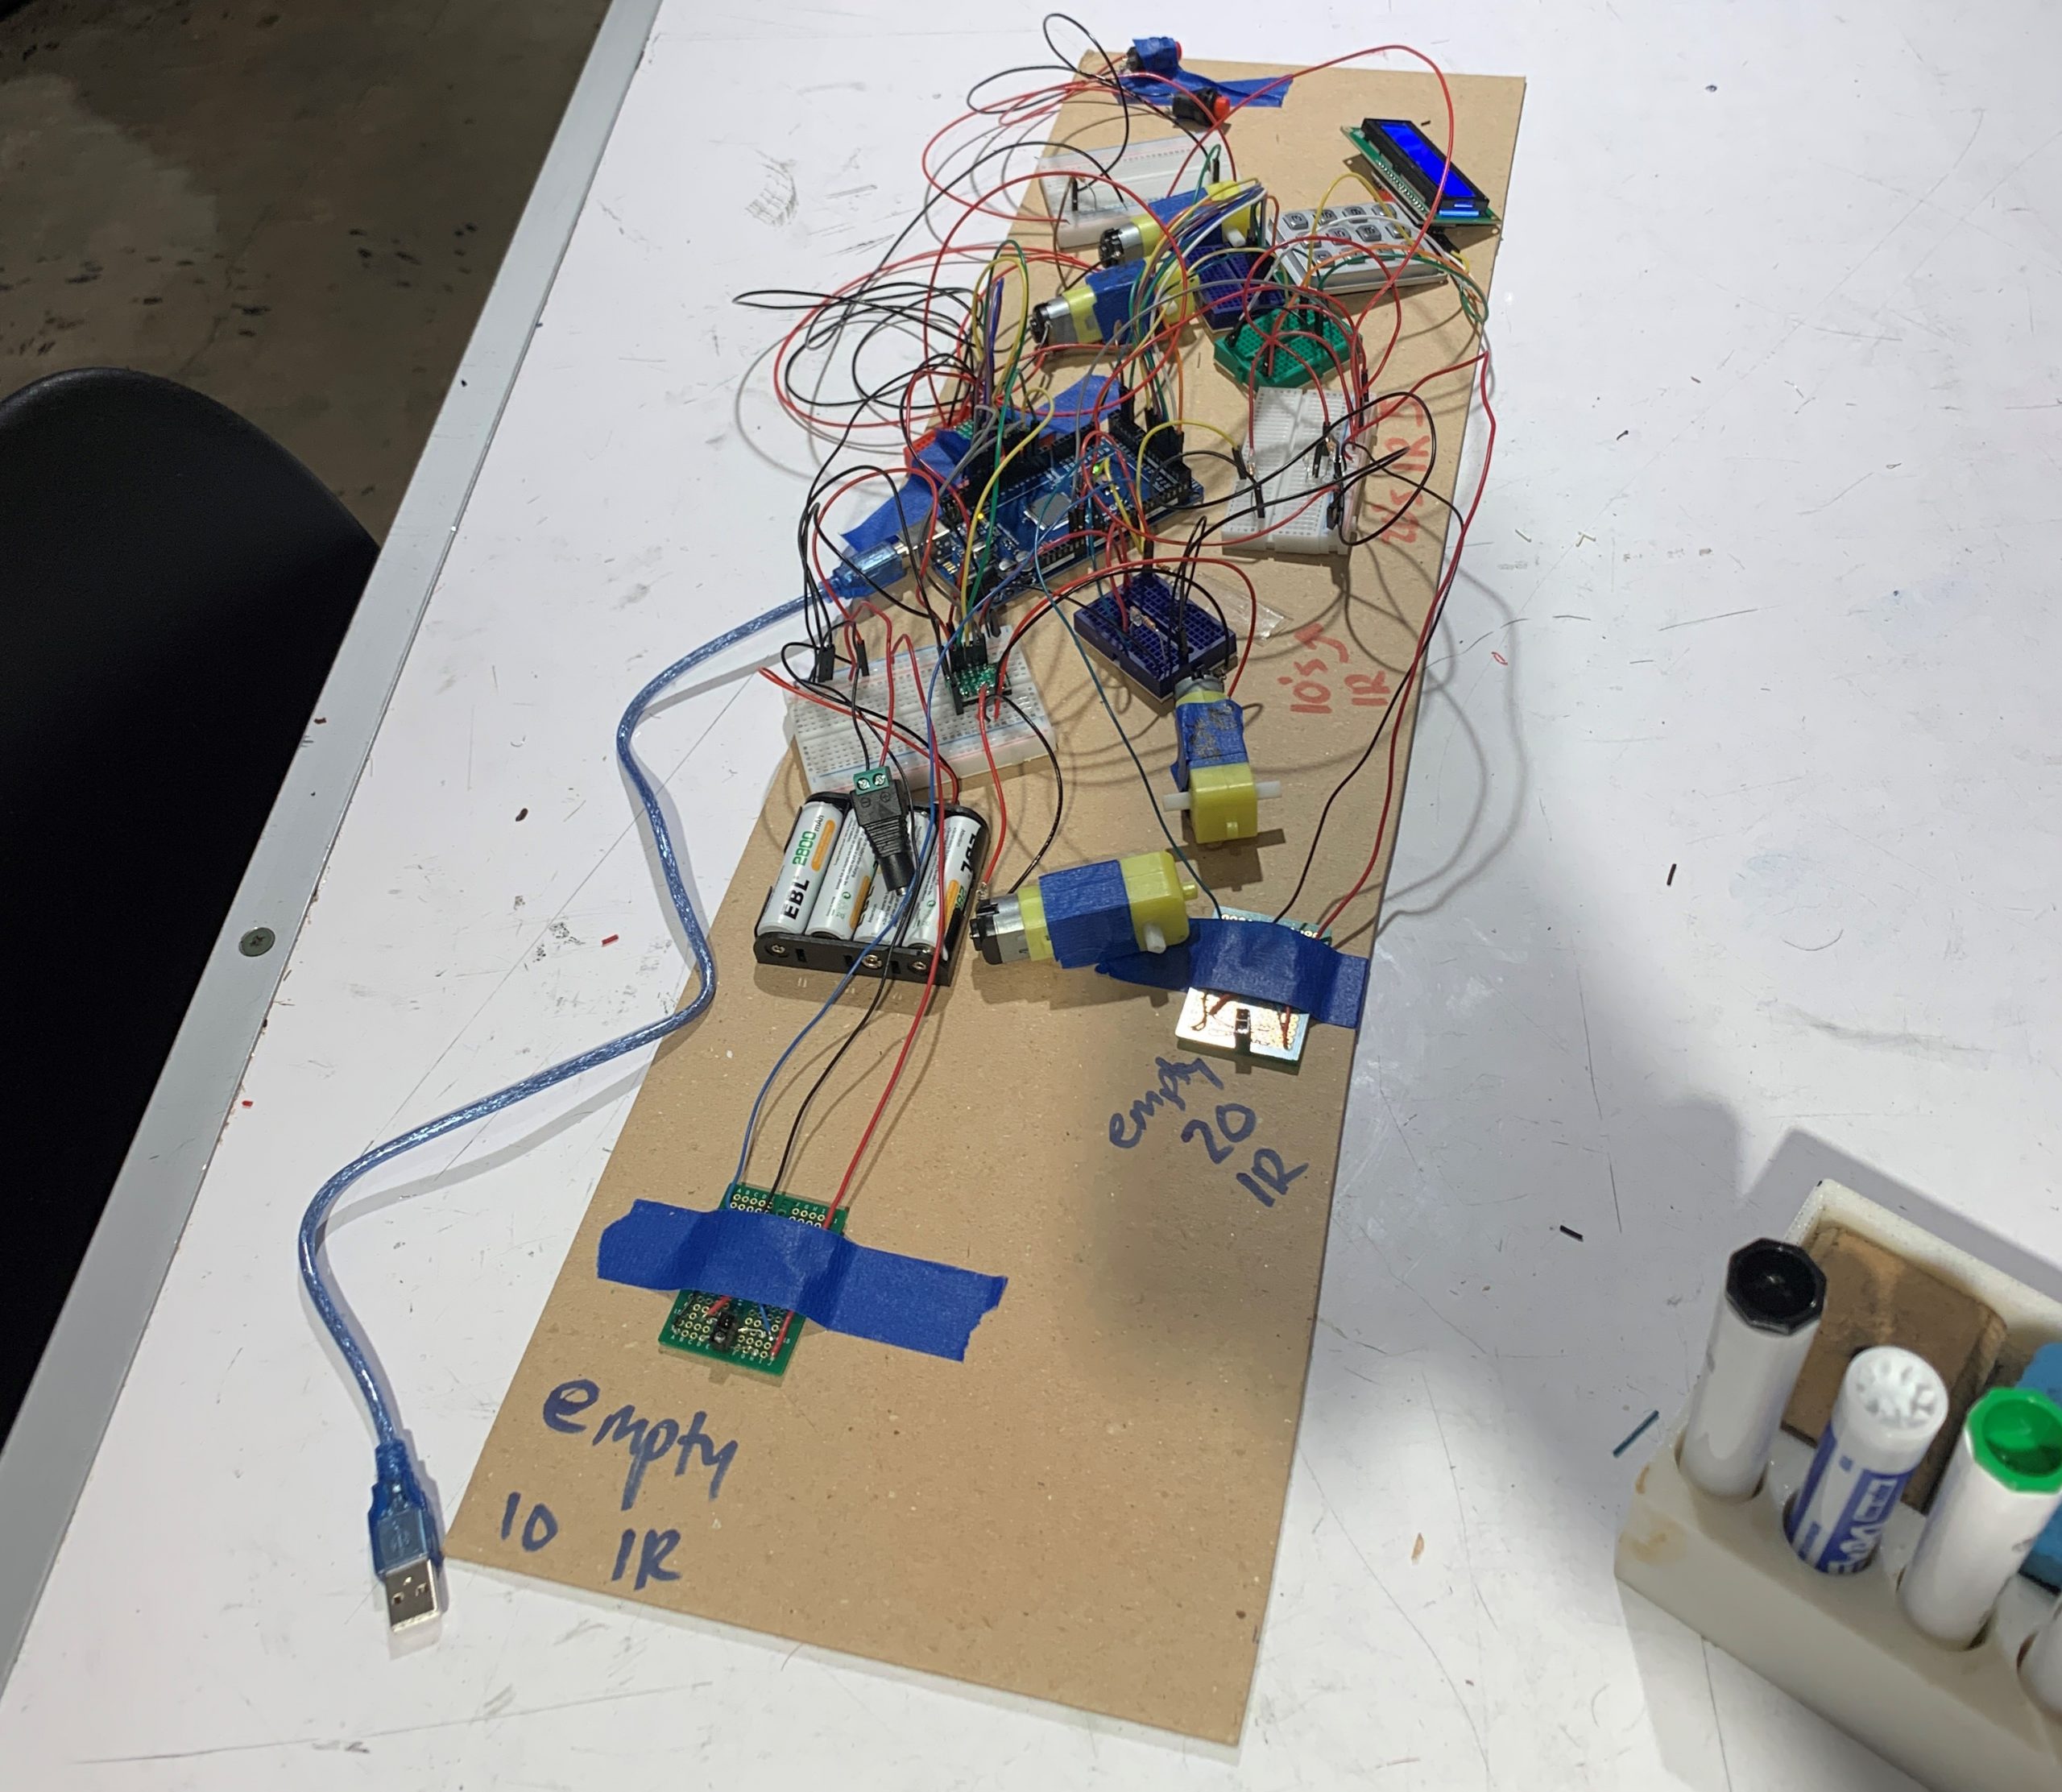 This image includes our hardware testing set-up. There is a long piece of cardboard with many electrical components and wires such as motors, a keypad, a microcontroller, and IR sensors.